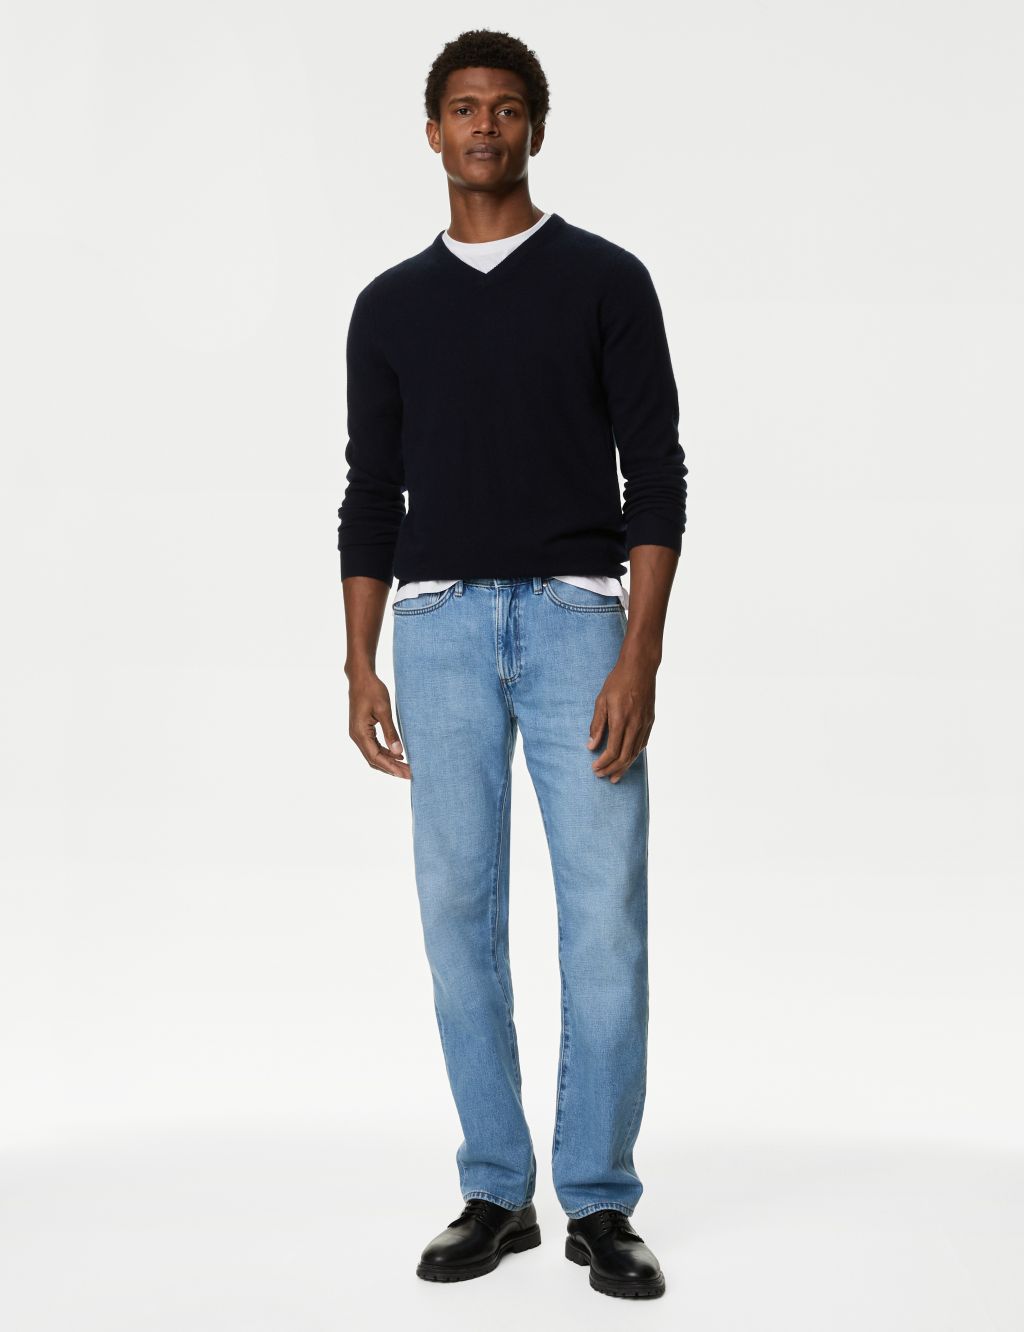 Straight Leg Soft Touch Jeans